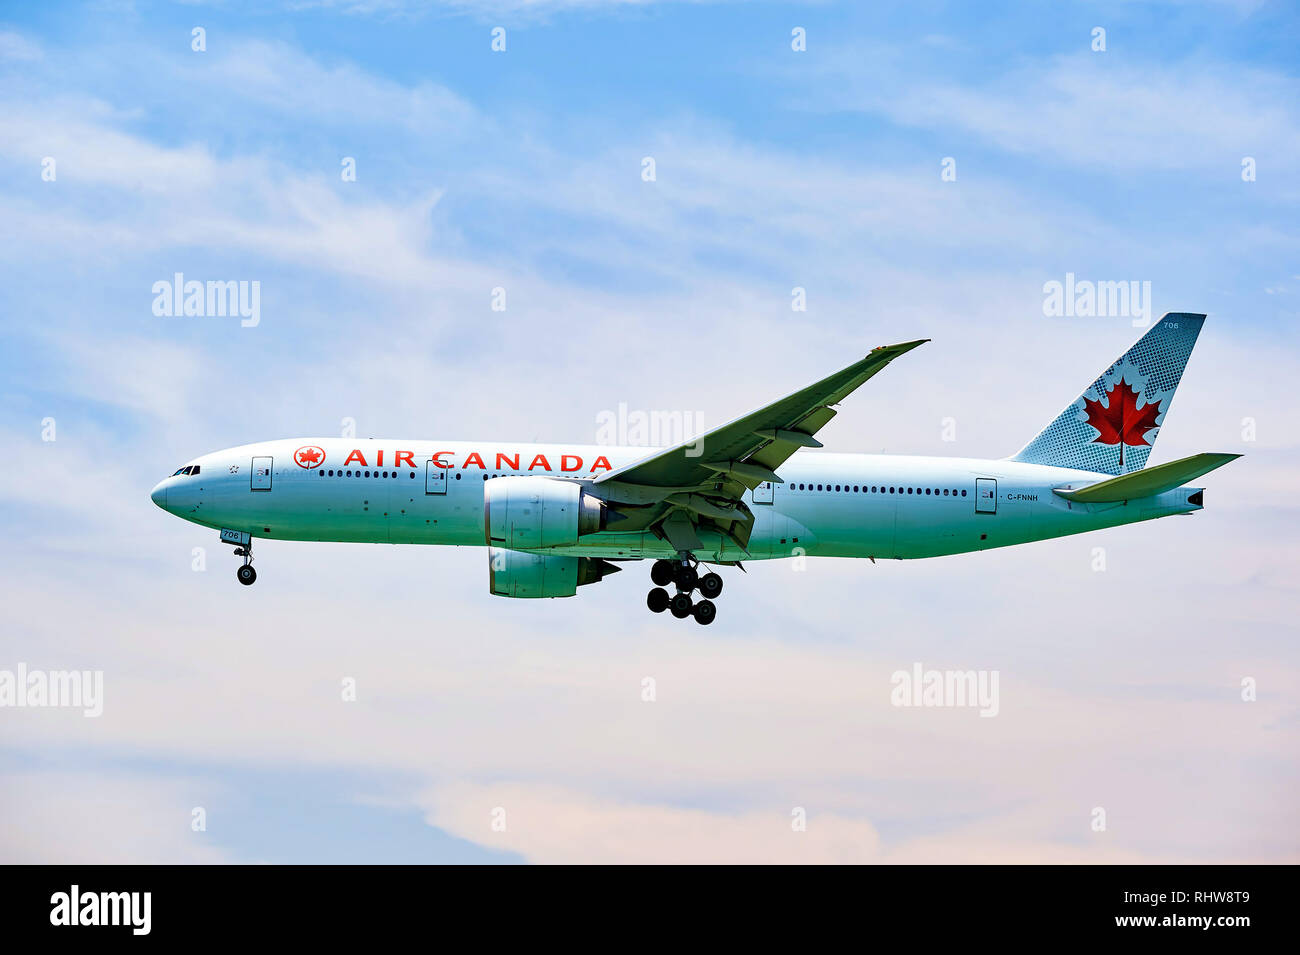 HONG KONG - JUNE 04, 2015: Air Canada Boeing 777 landing at Hong Kong airport. Air Canada is the flag carrier and largest airline of Canada. Stock Photo